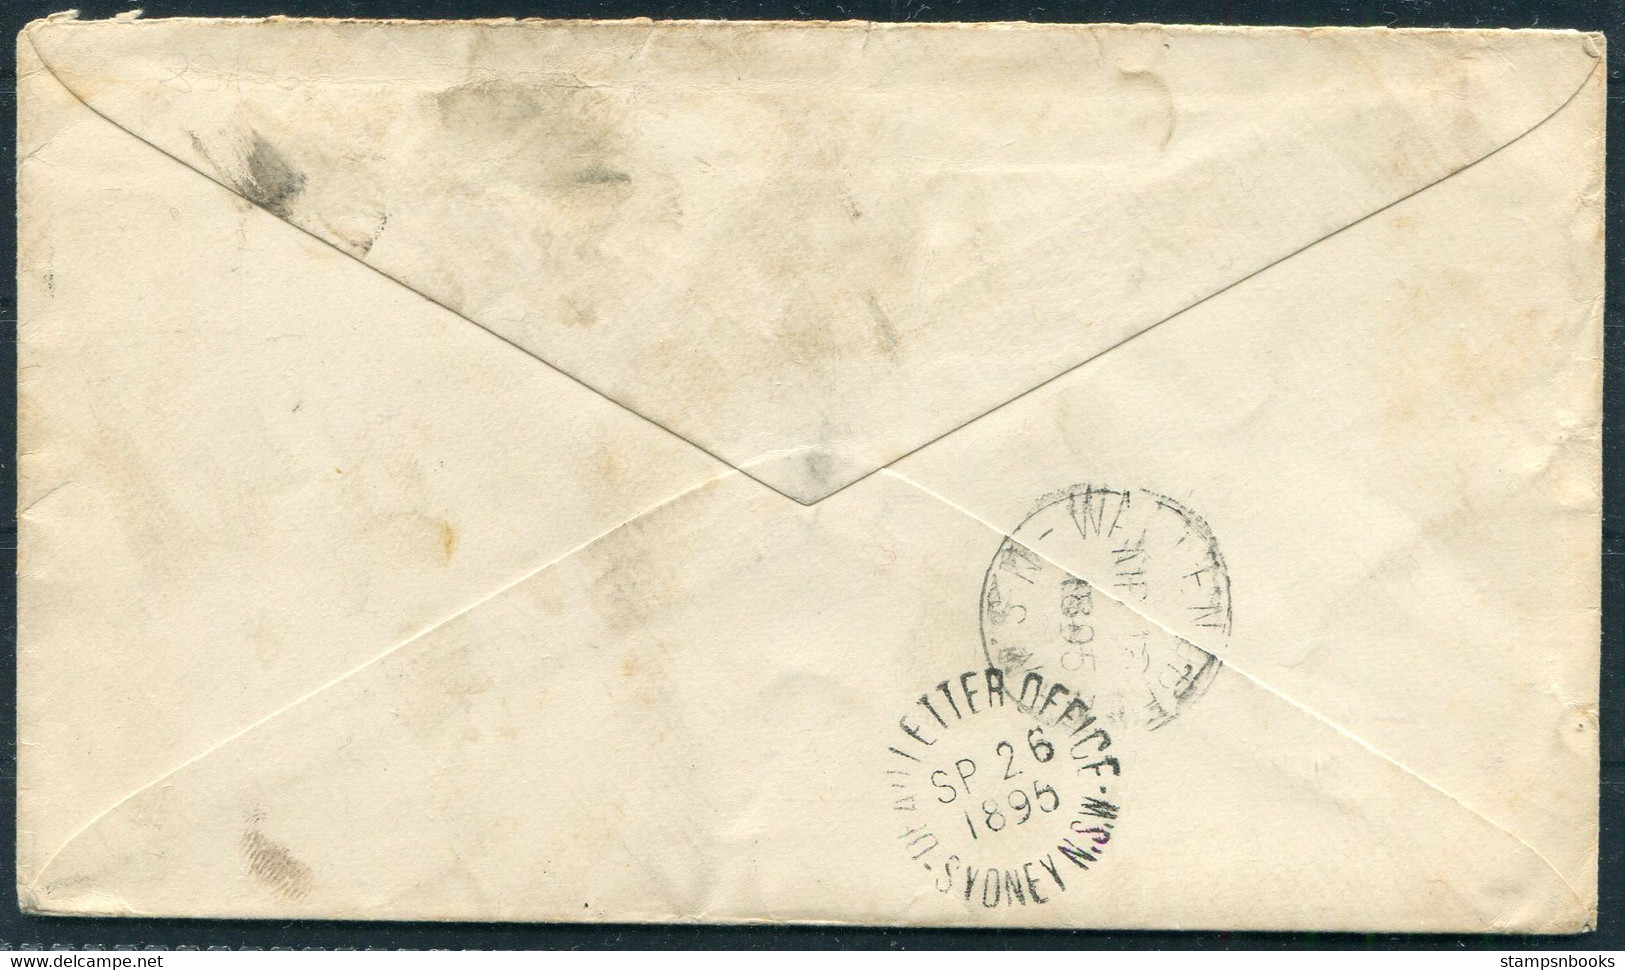 1895 Australia, New South Wales Stationery Cover Sydney - Wallendbeen "UNCLAIMED" Dead Letter Office D.L.O. - Storia Postale